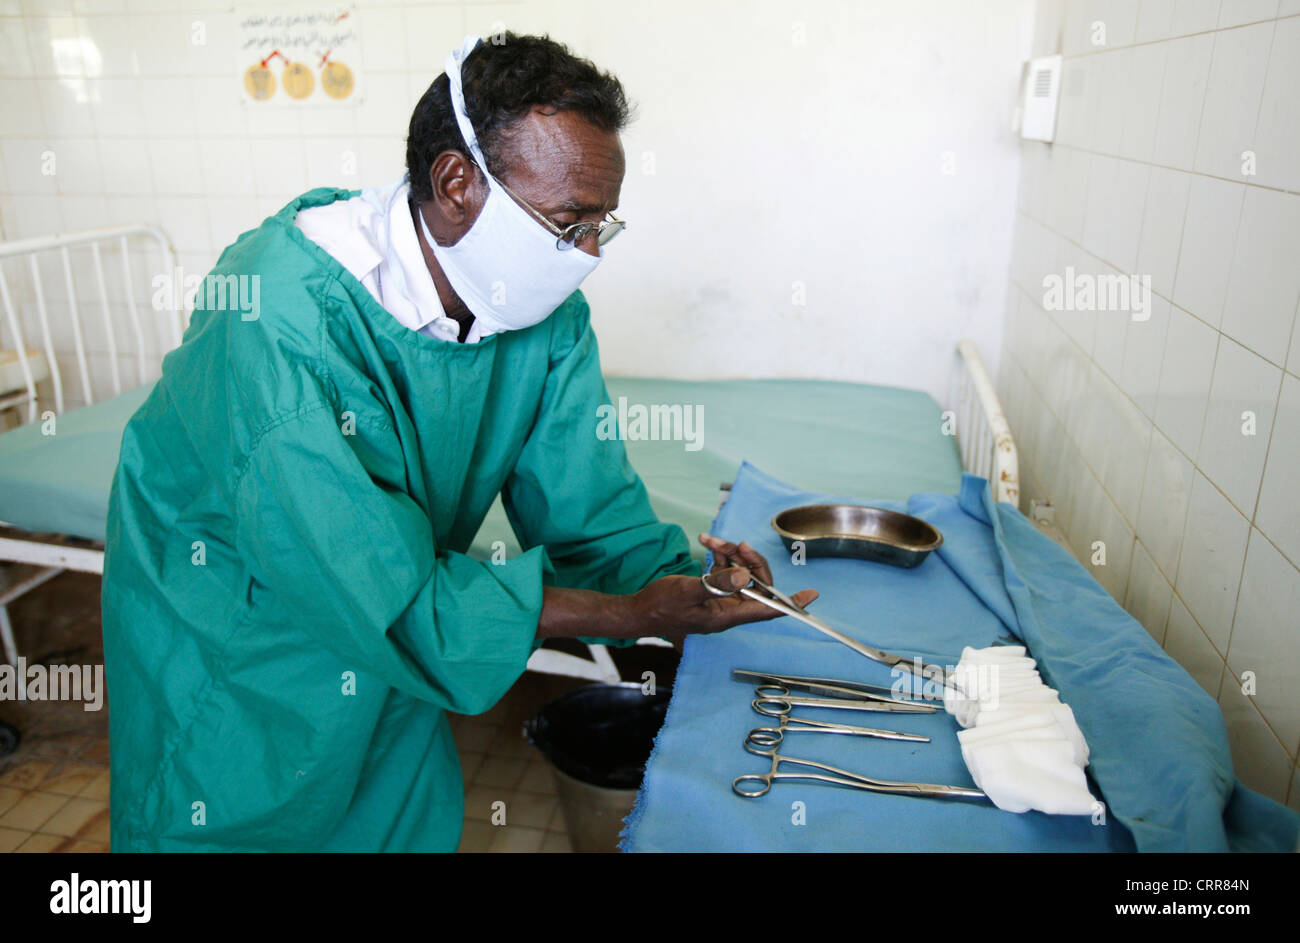 Medical staff lay out sterilized medical equipment in a hospital ward. Stock Photo